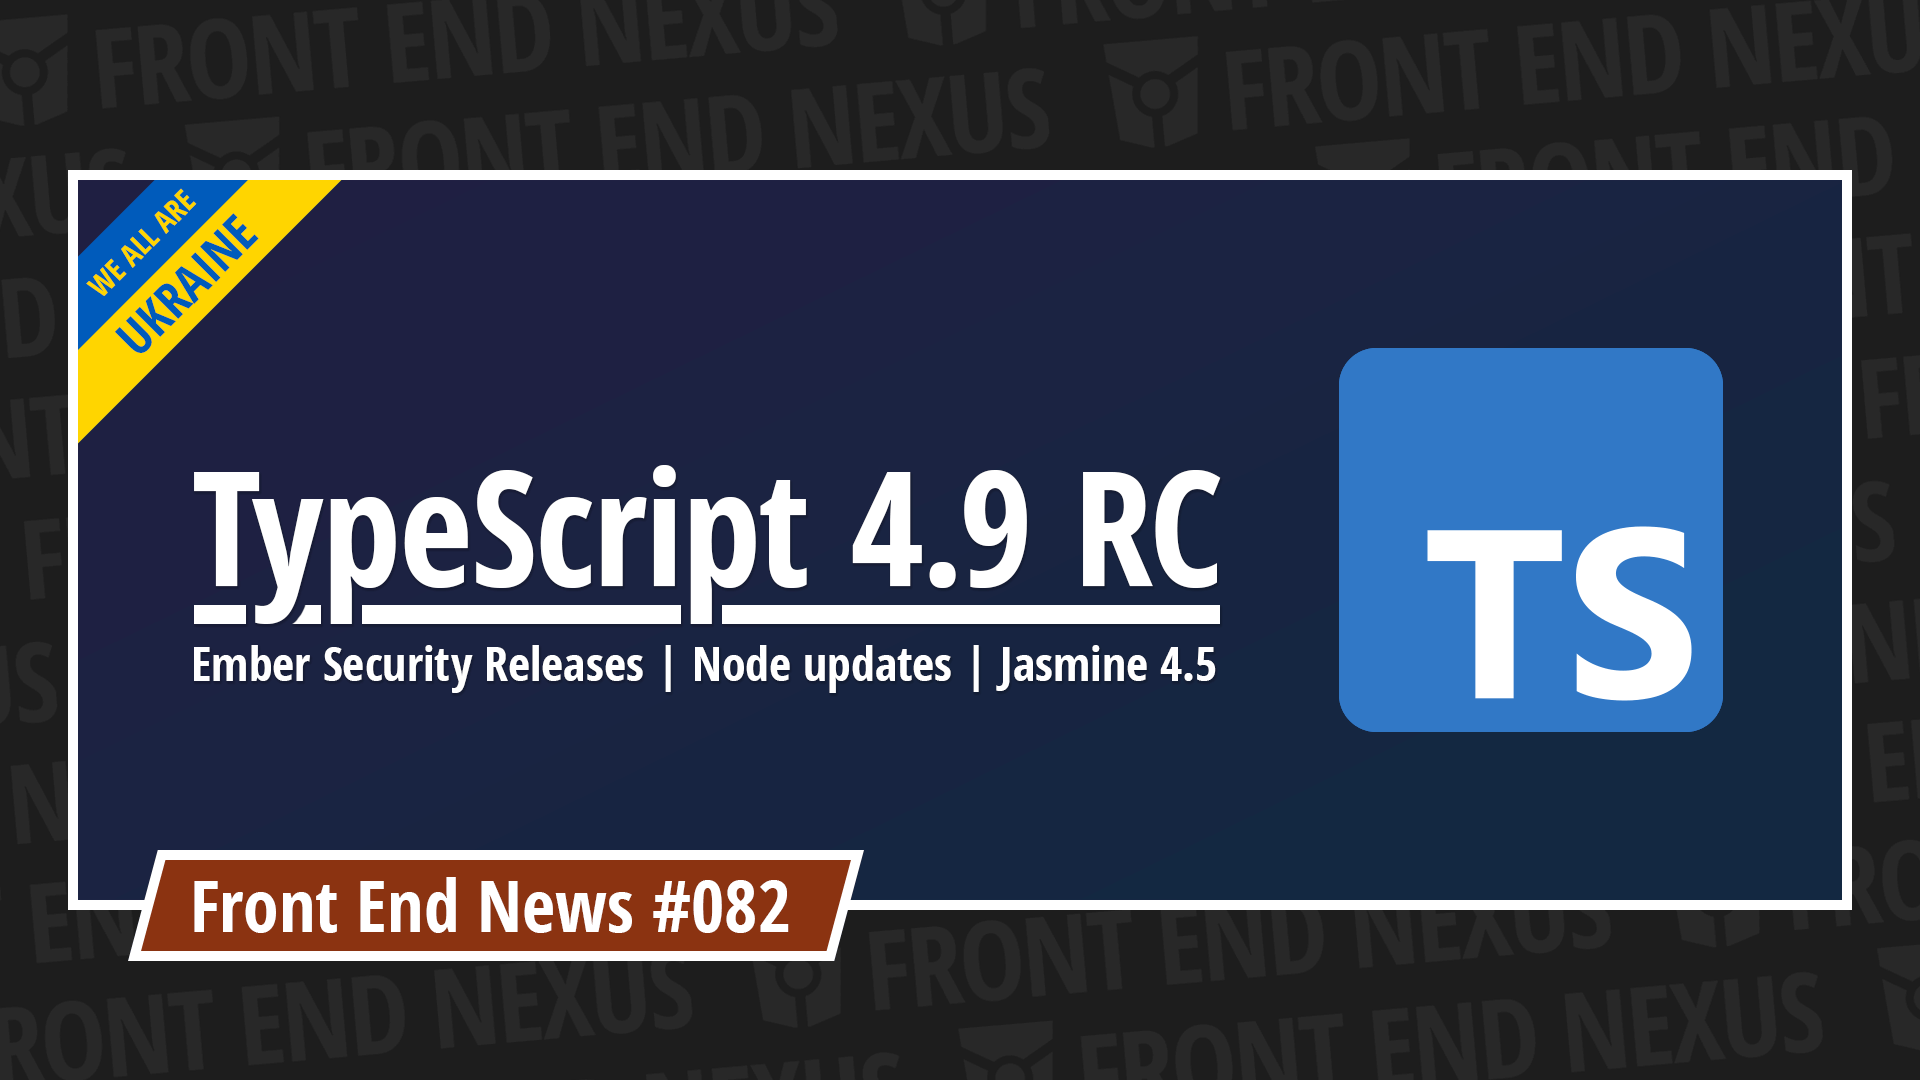 TypeScript 4.9 RC, Ember Security Releases, Node updates, Jasmine 4.5, and more | Front End News #082